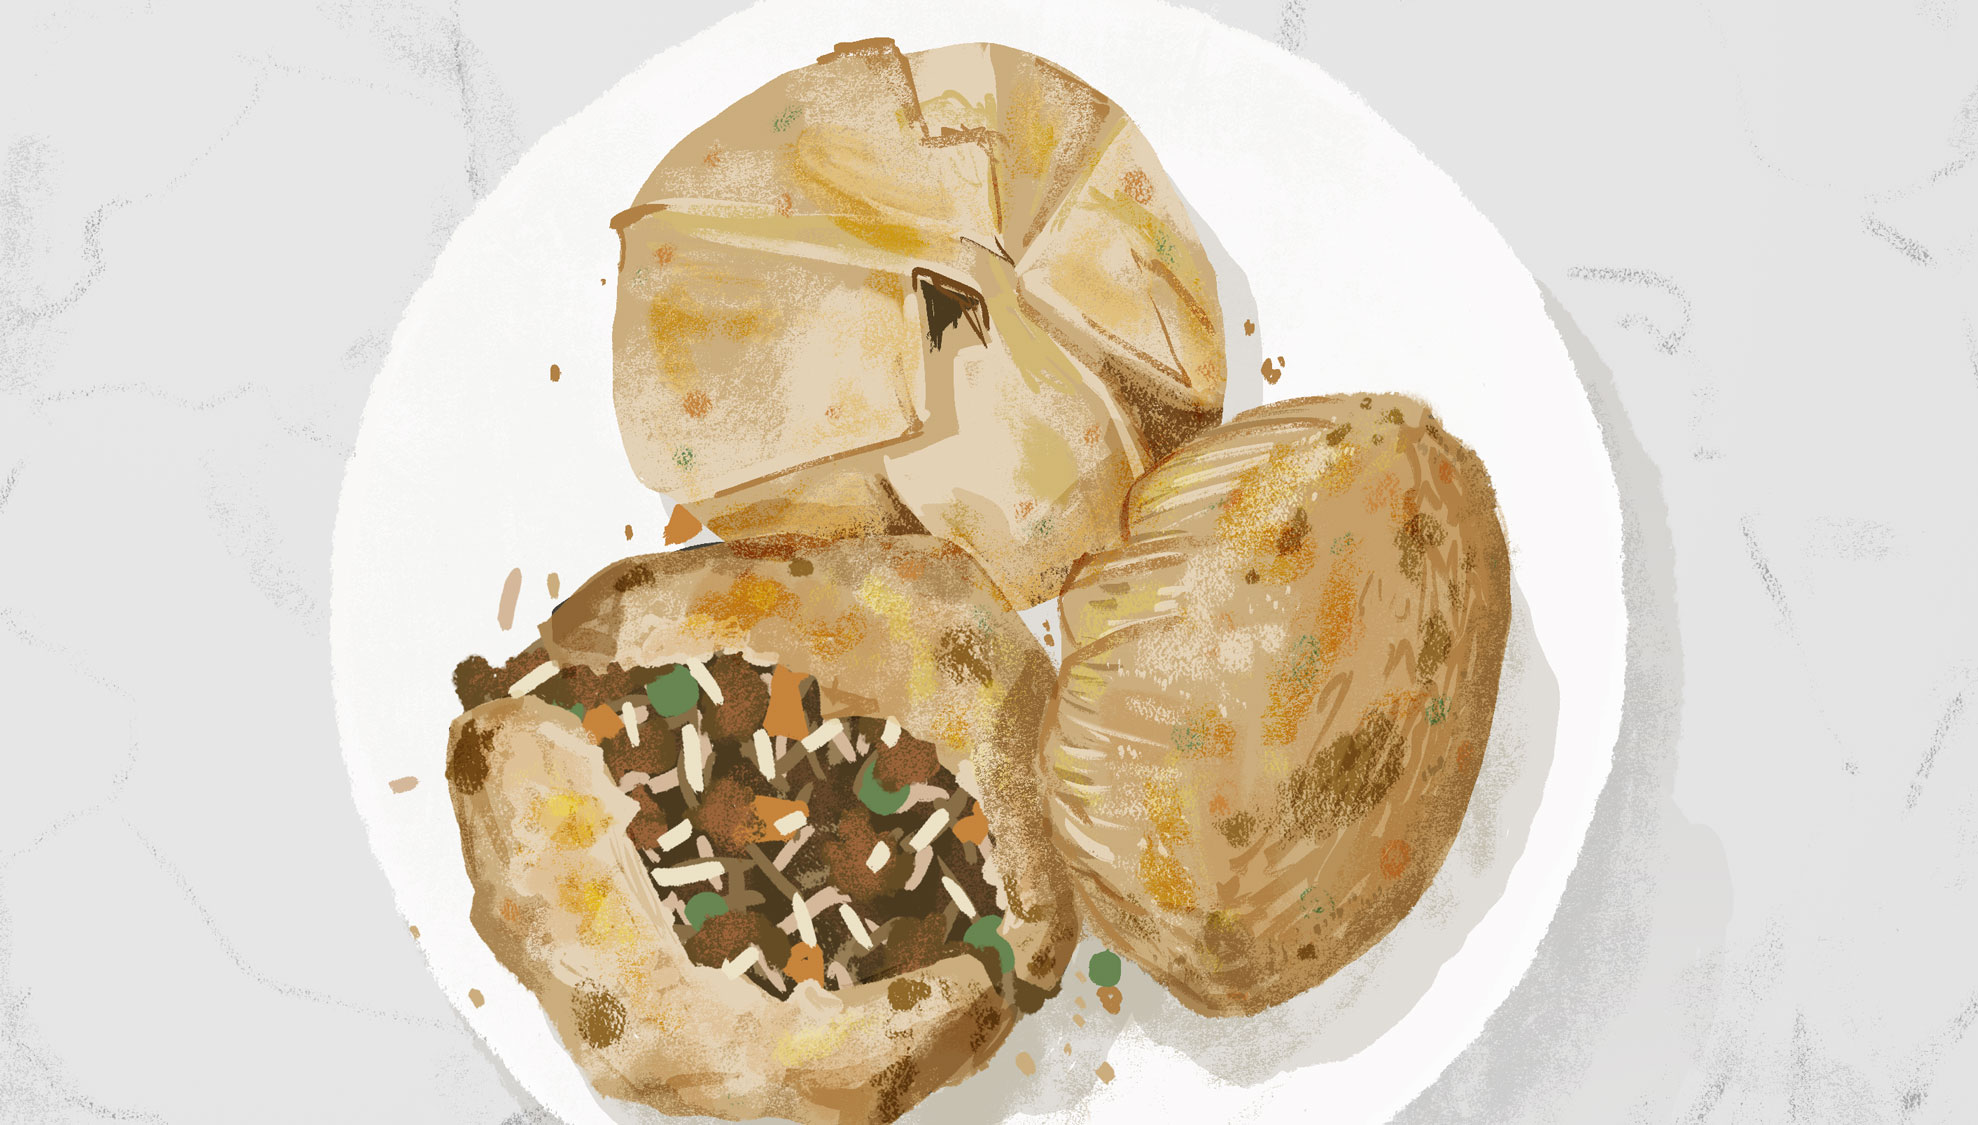 Illustration of Ouzie, a Middle Eastern food